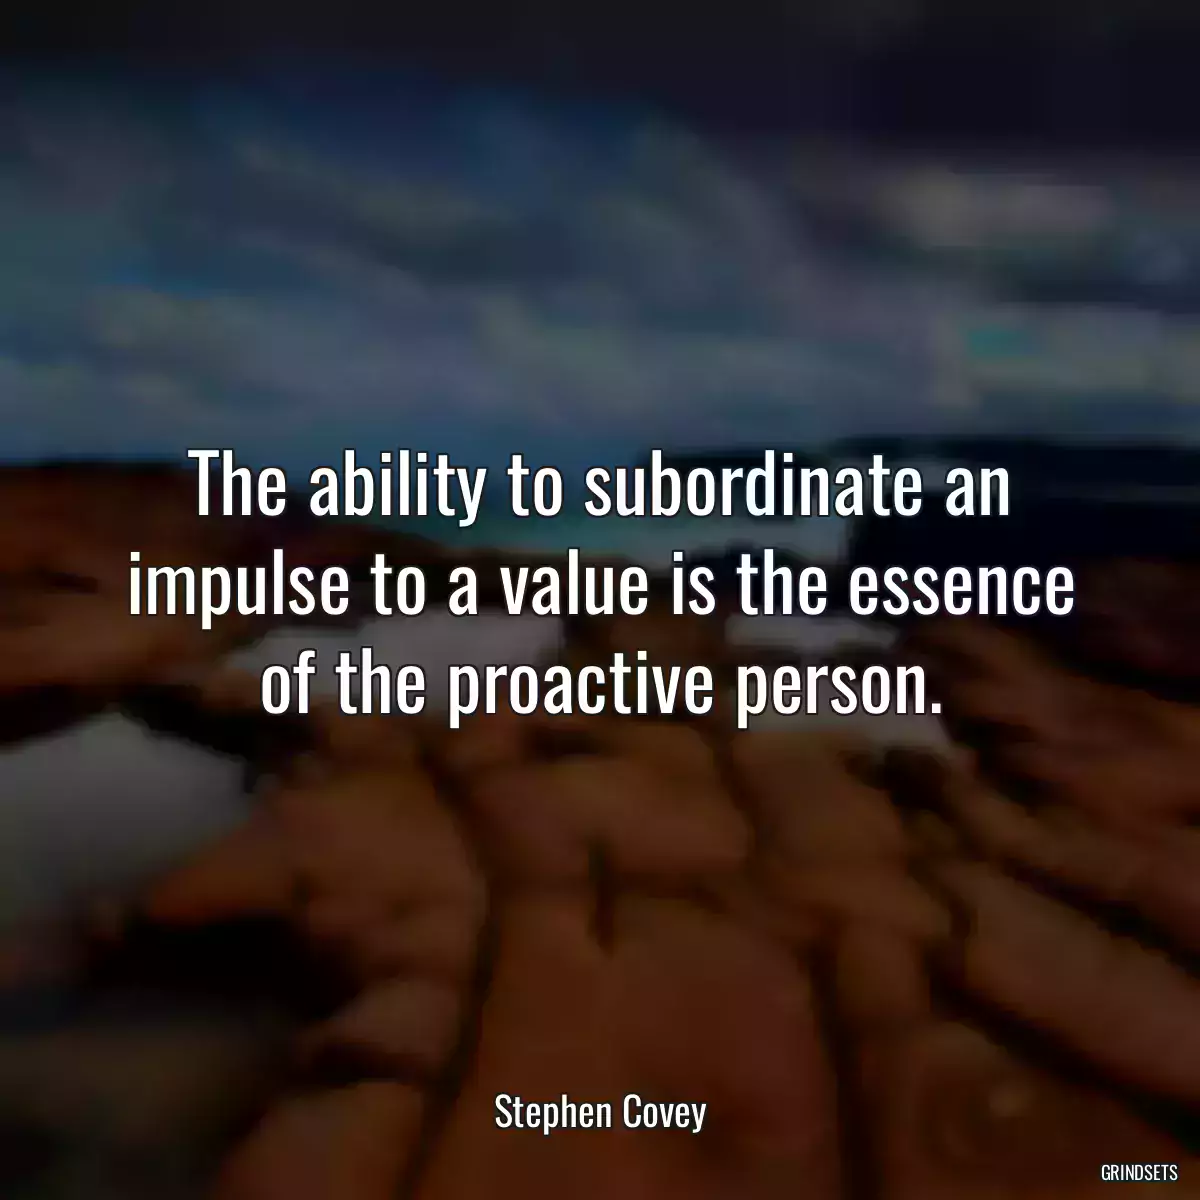 The ability to subordinate an impulse to a value is the essence of the proactive person.